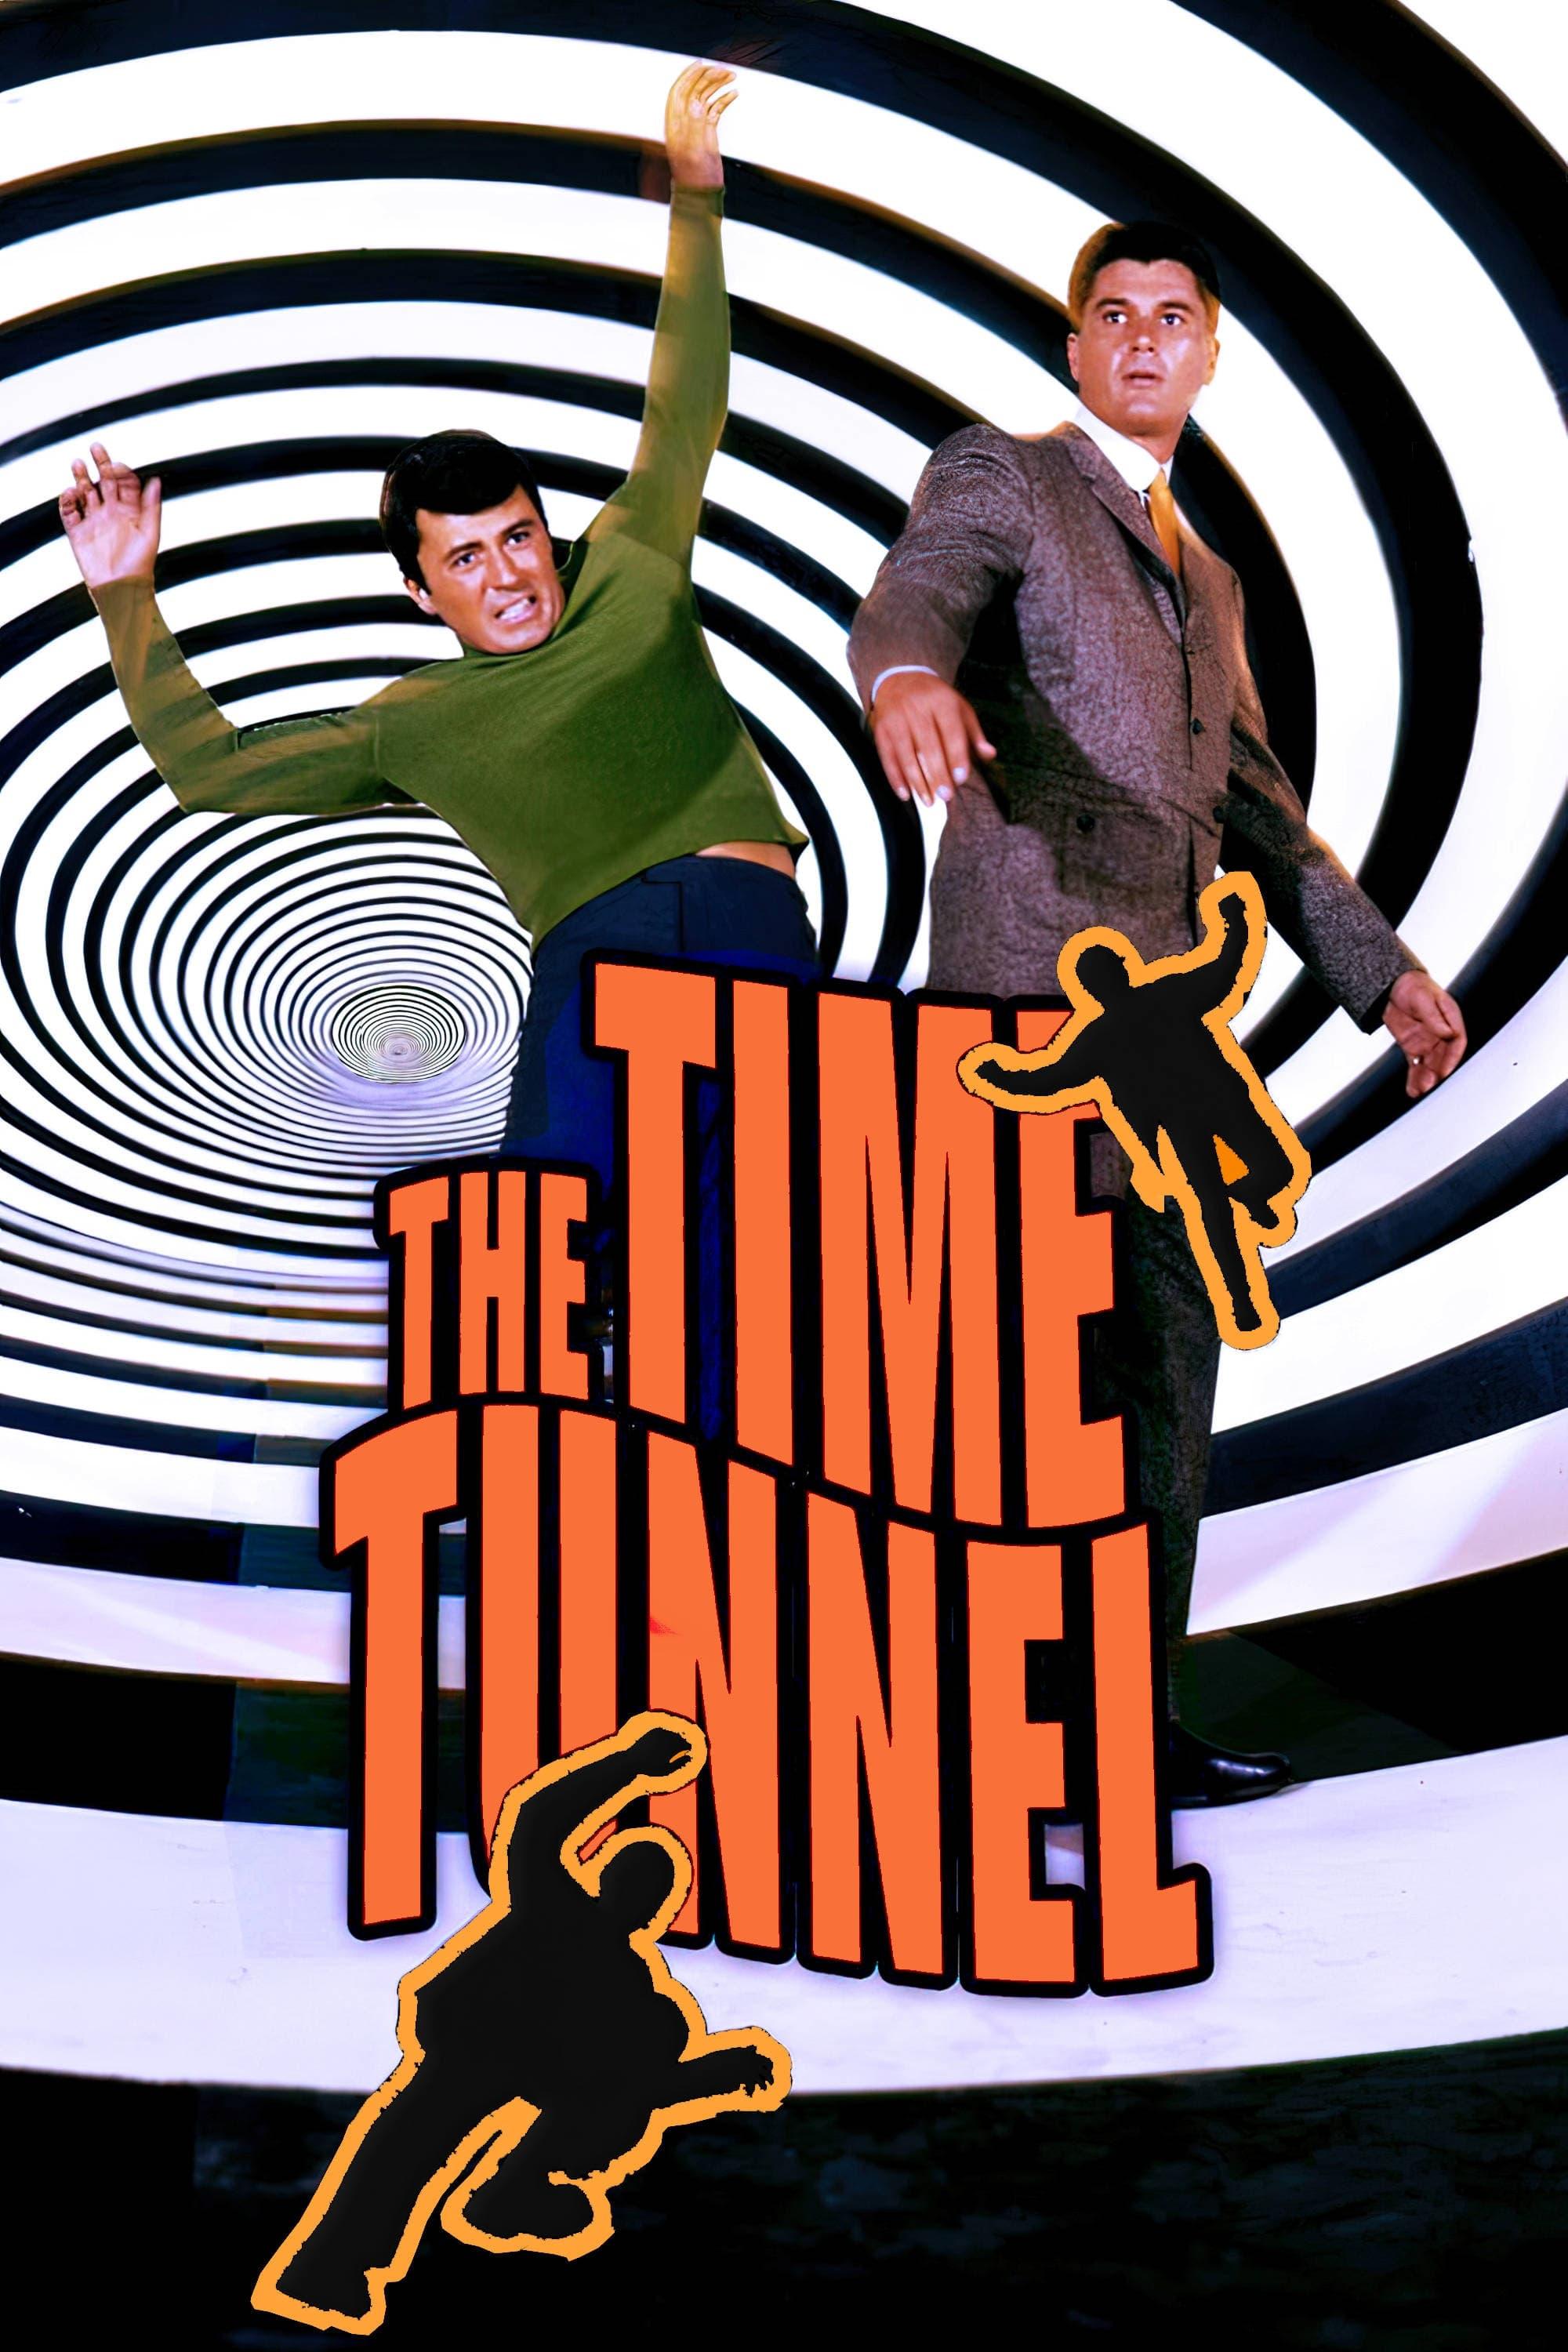 The Time Tunnel poster